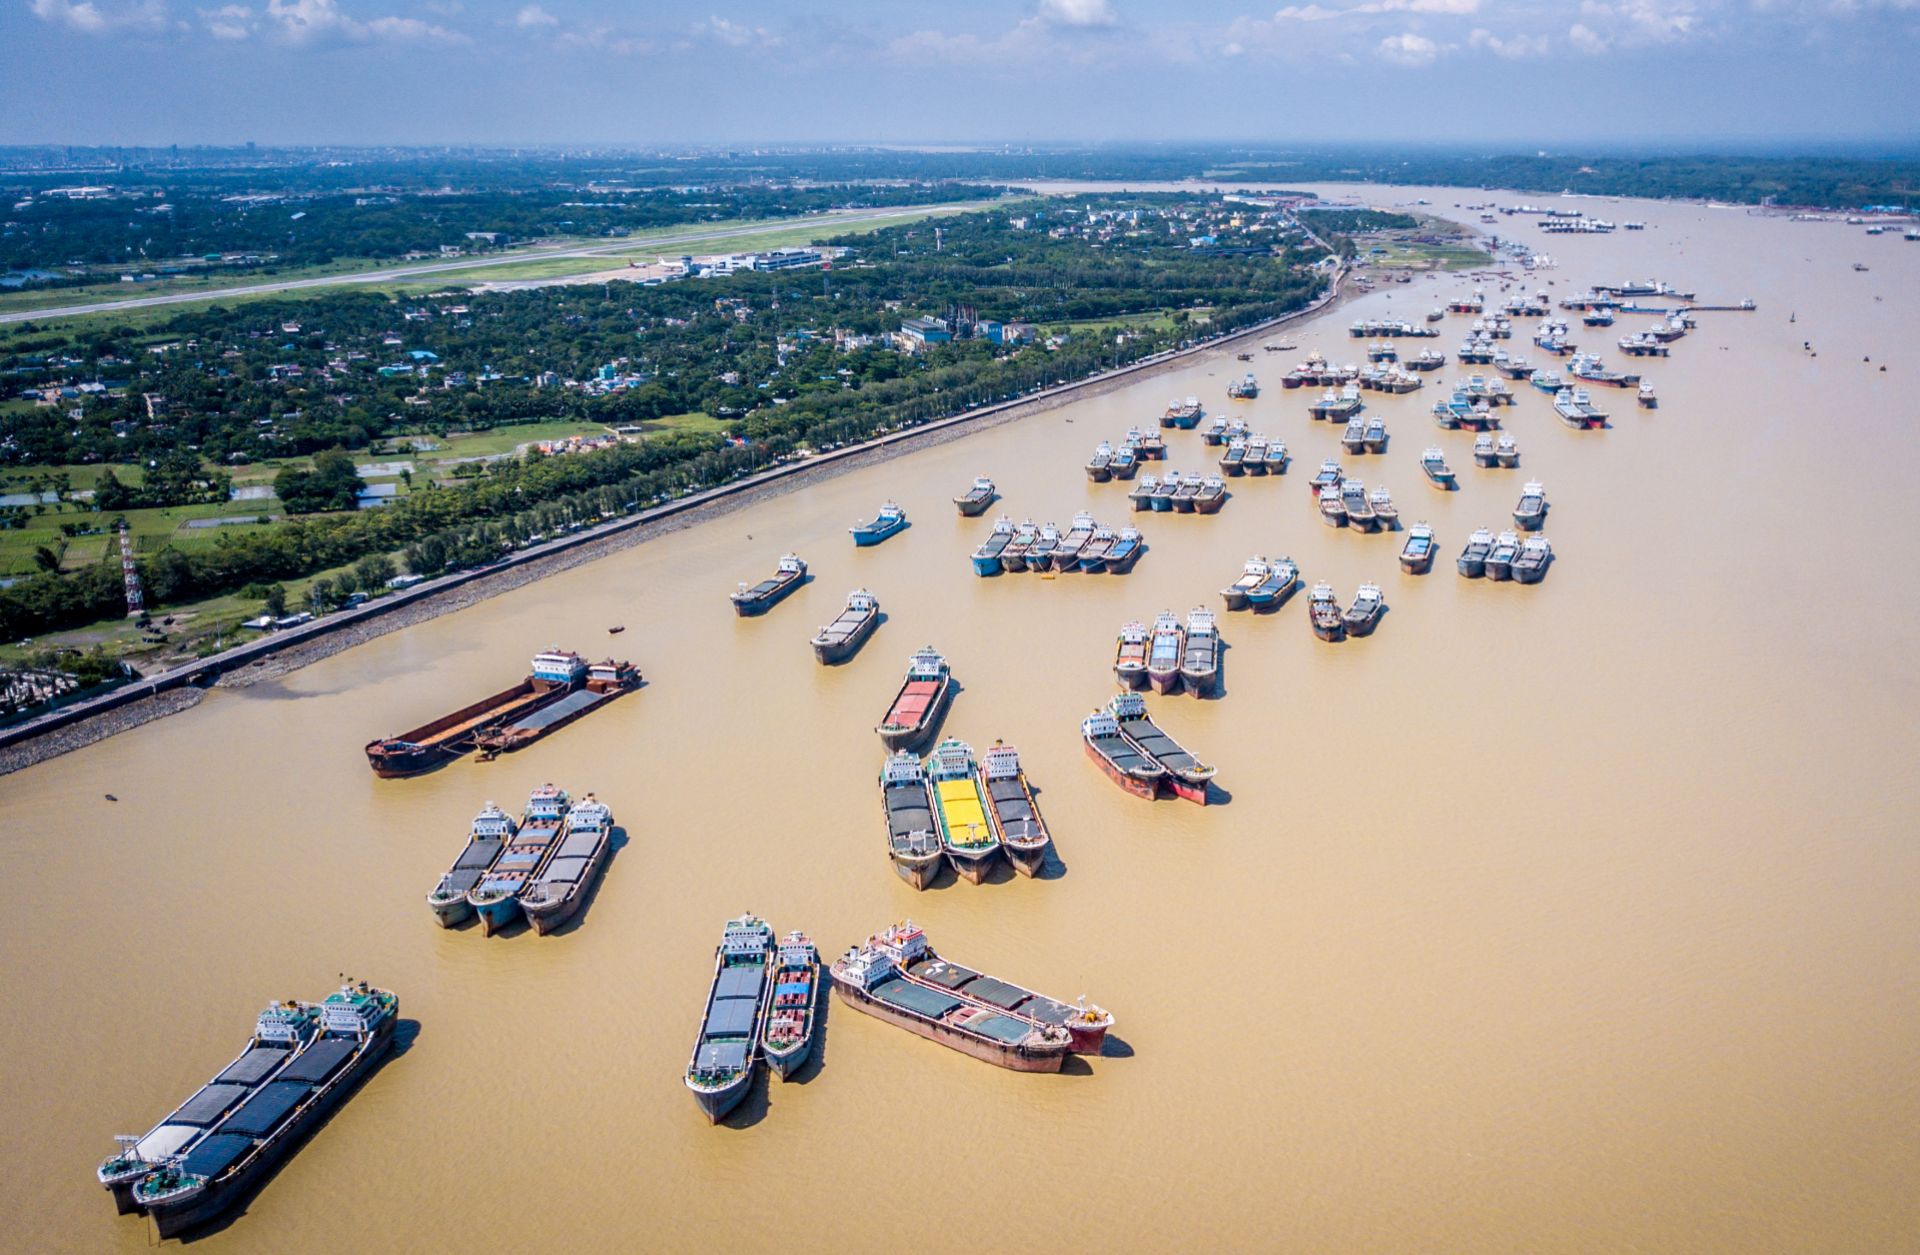 An image of the Port of Chittagong in Bangladesh, the busiest seaport on the coastline of the Bay of Bengal.